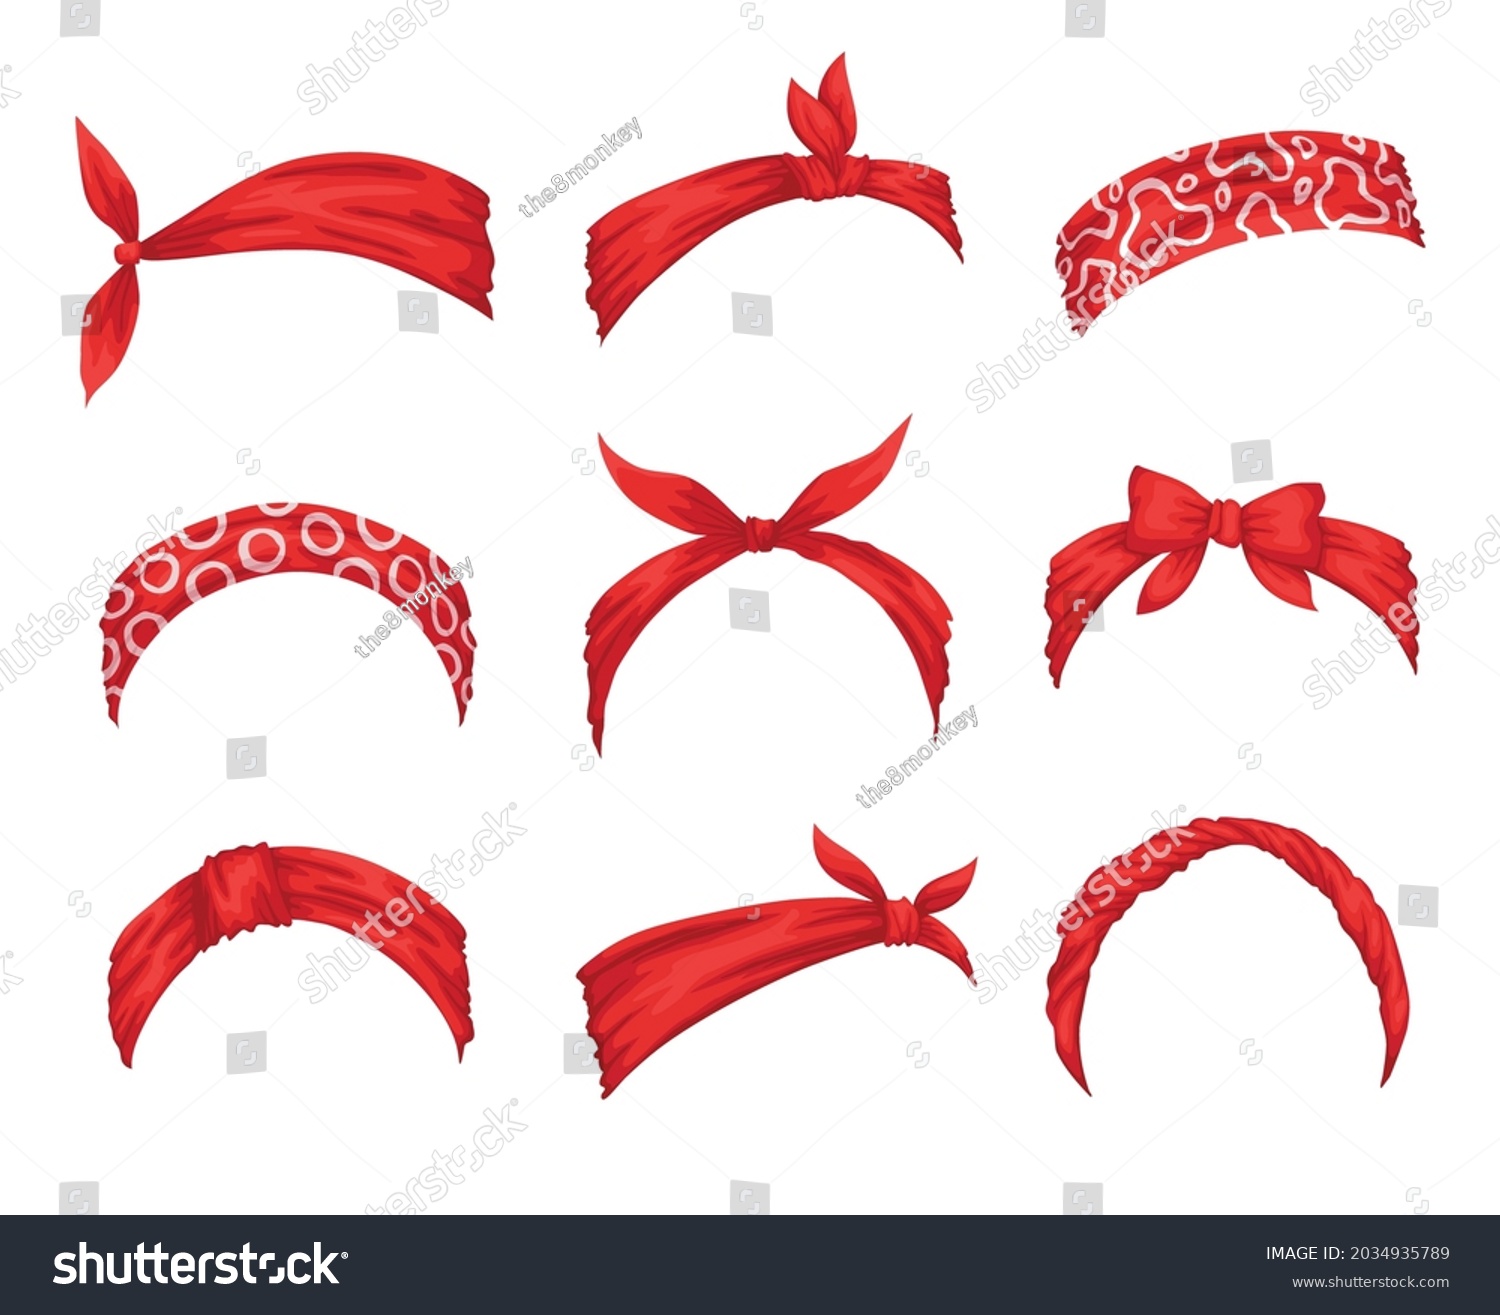 SVG of Collection of retro headbands for woman. Mockups of decorative hair knott. Red bandana windy hair dressing. Tied handkerchief for hairstyles svg